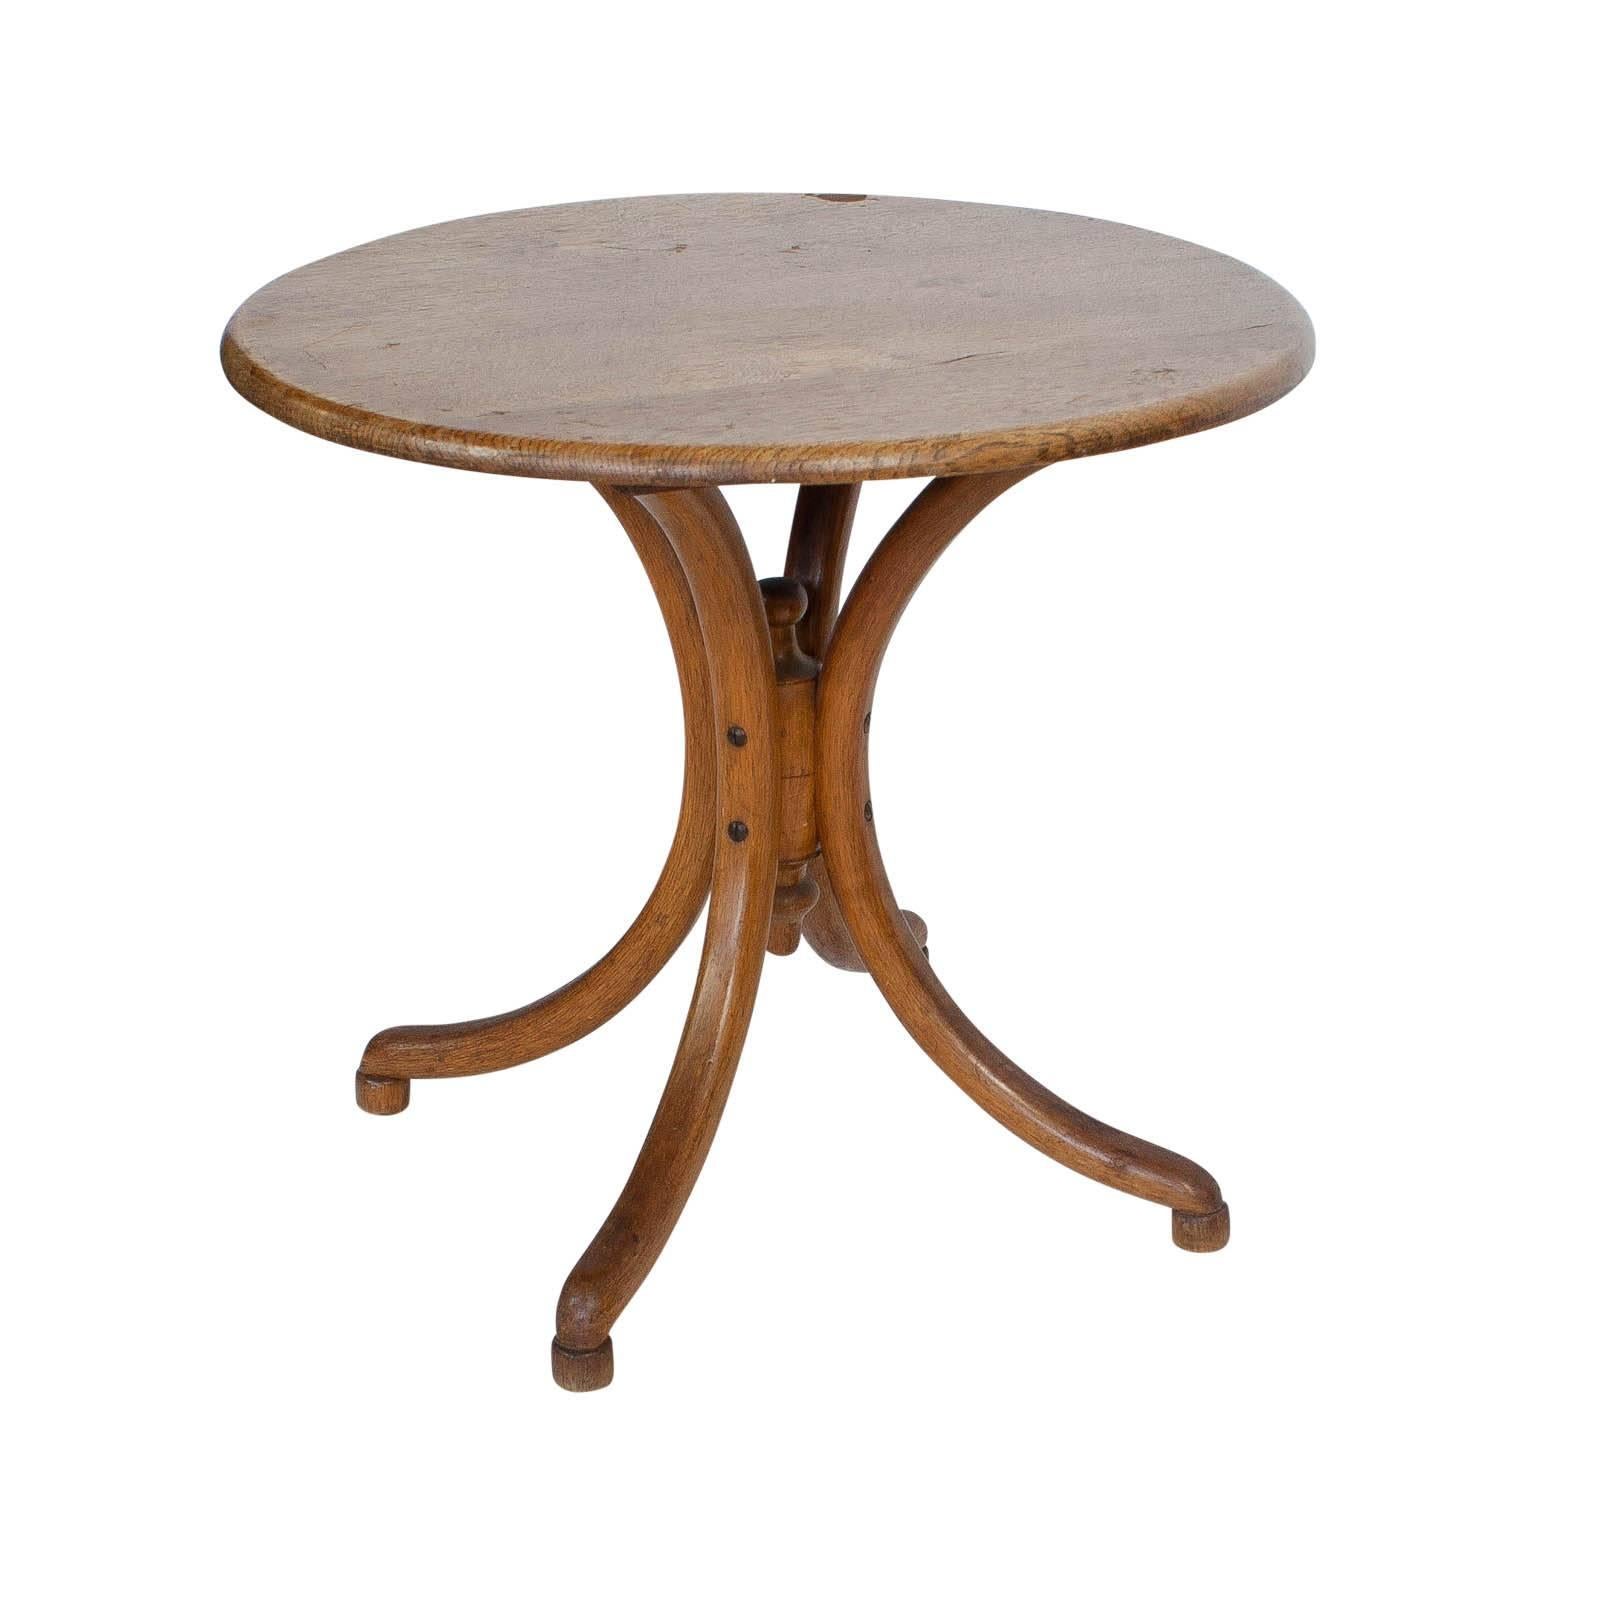 A miniature Thonet round child's table in oak, Austria, circa 1900. Great as a side table or coffee table.